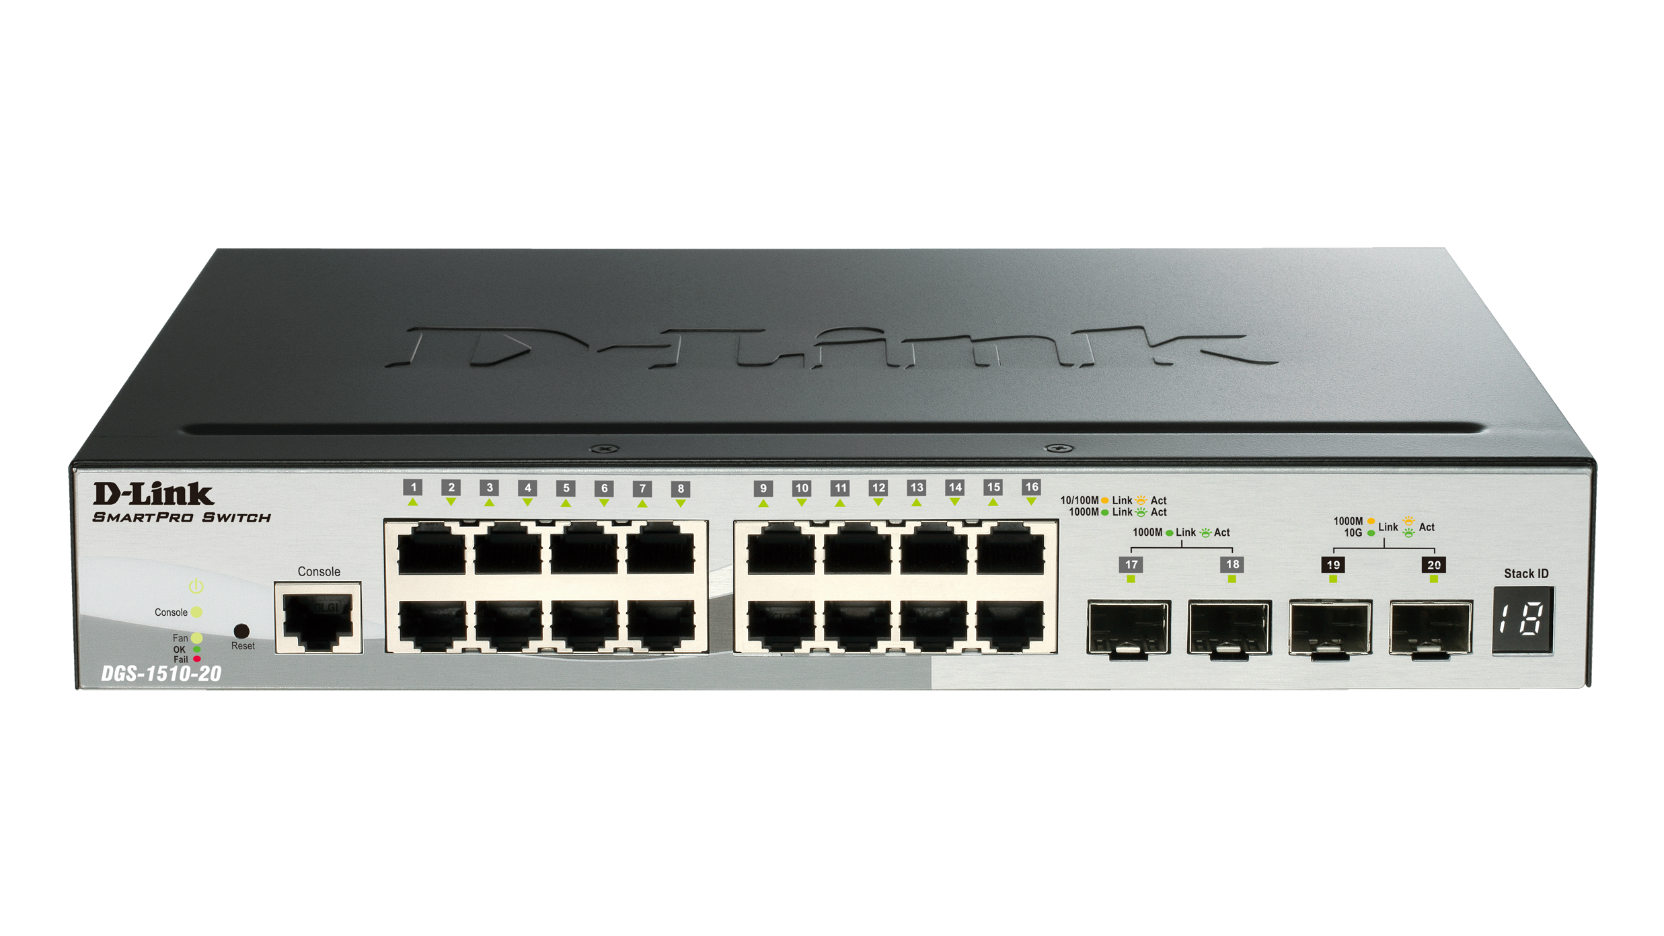 20-Port Gigabit Stackable Smart Managed Switch including 2 10G SFP+ and 2 SFP ports